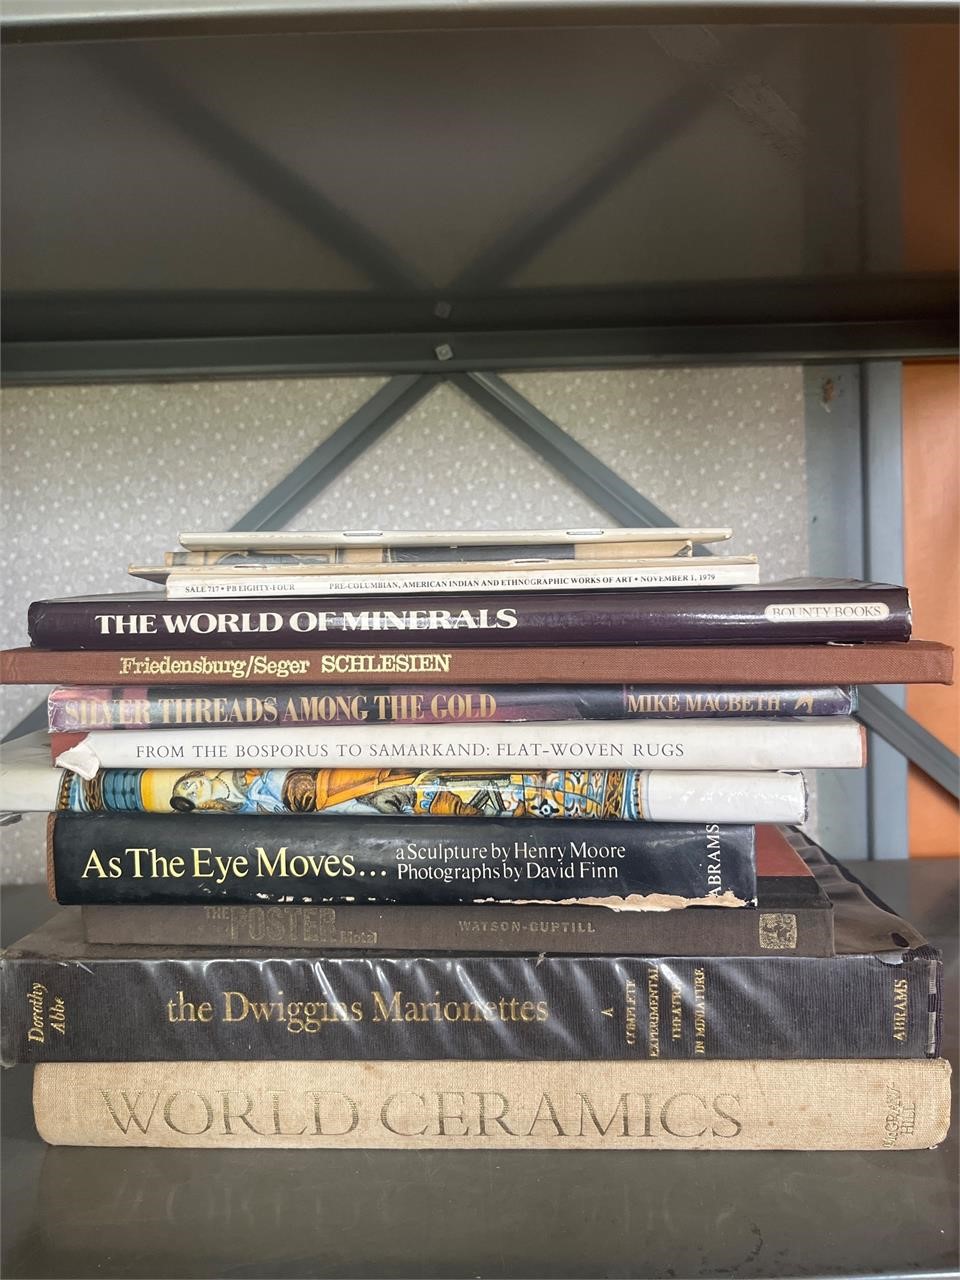 World ceramics and other books